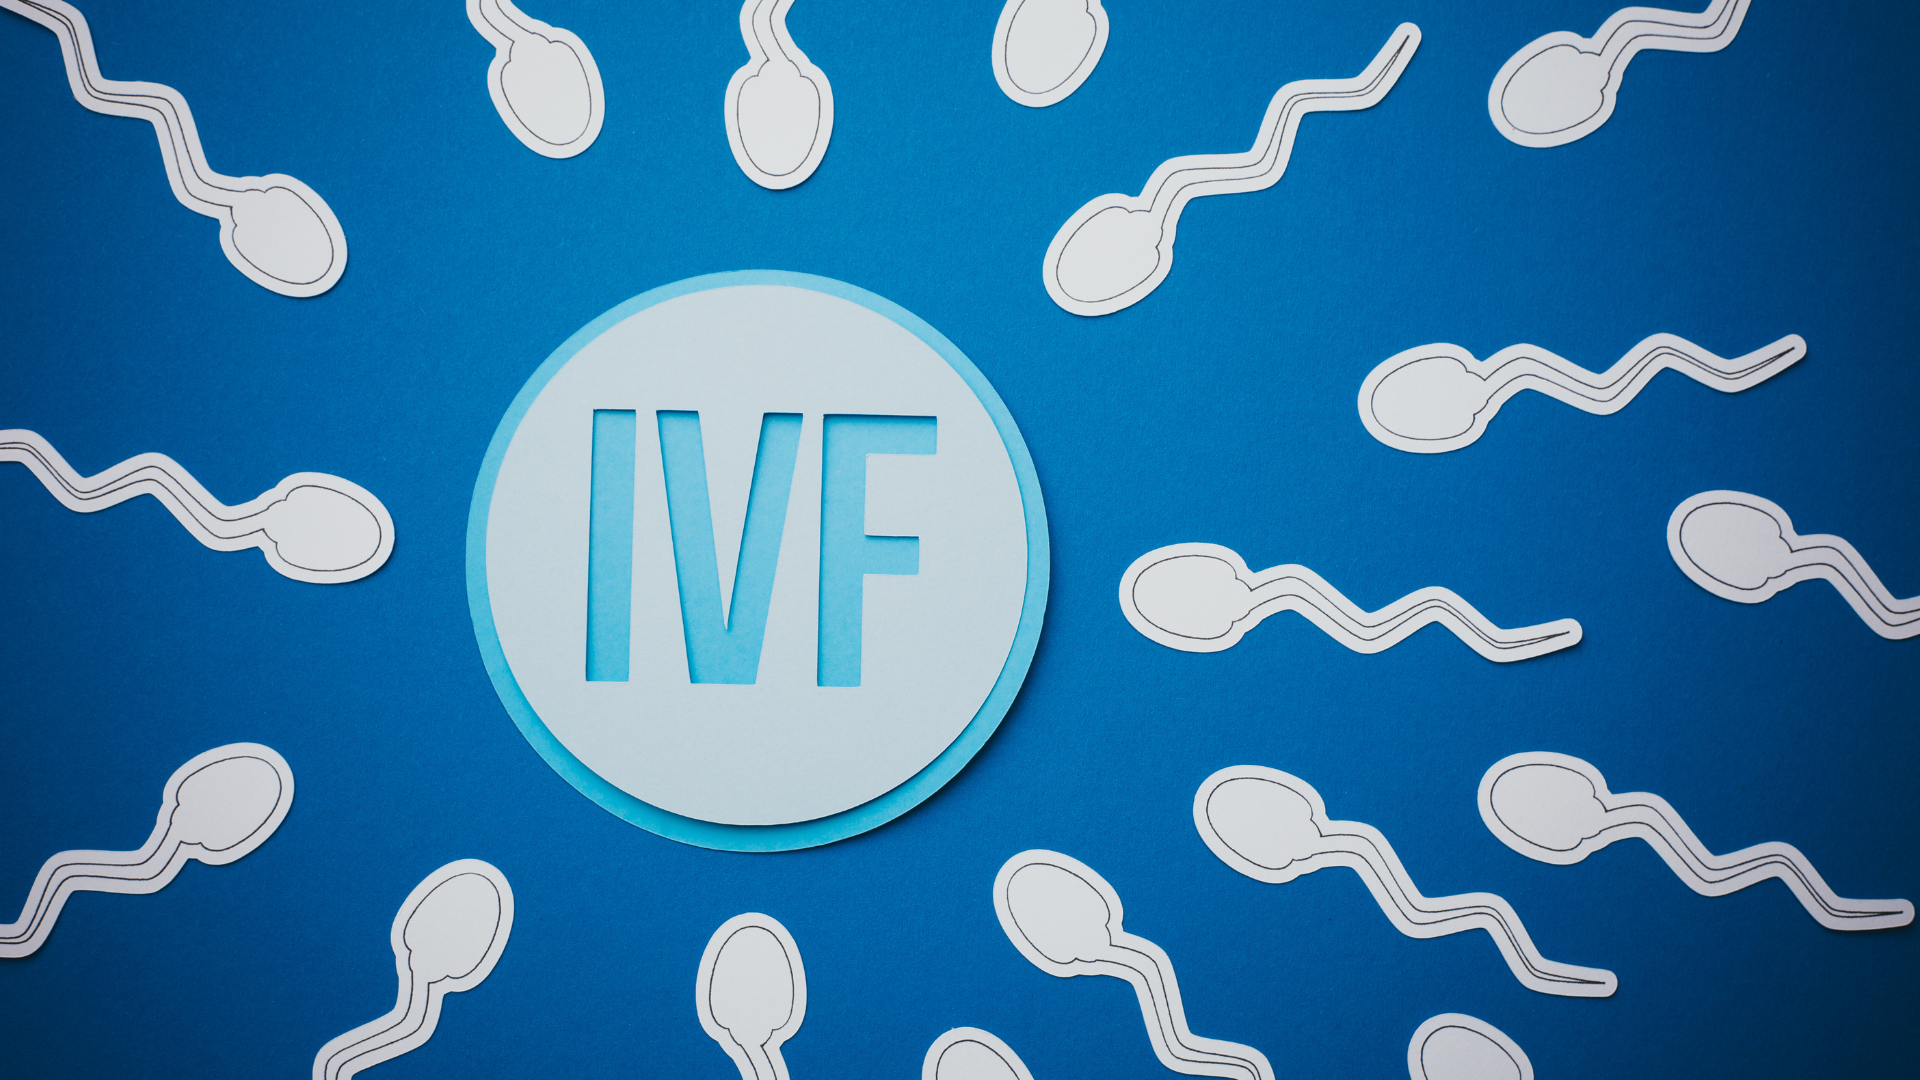 What Is The Legal Age For IVF Procedures In India?